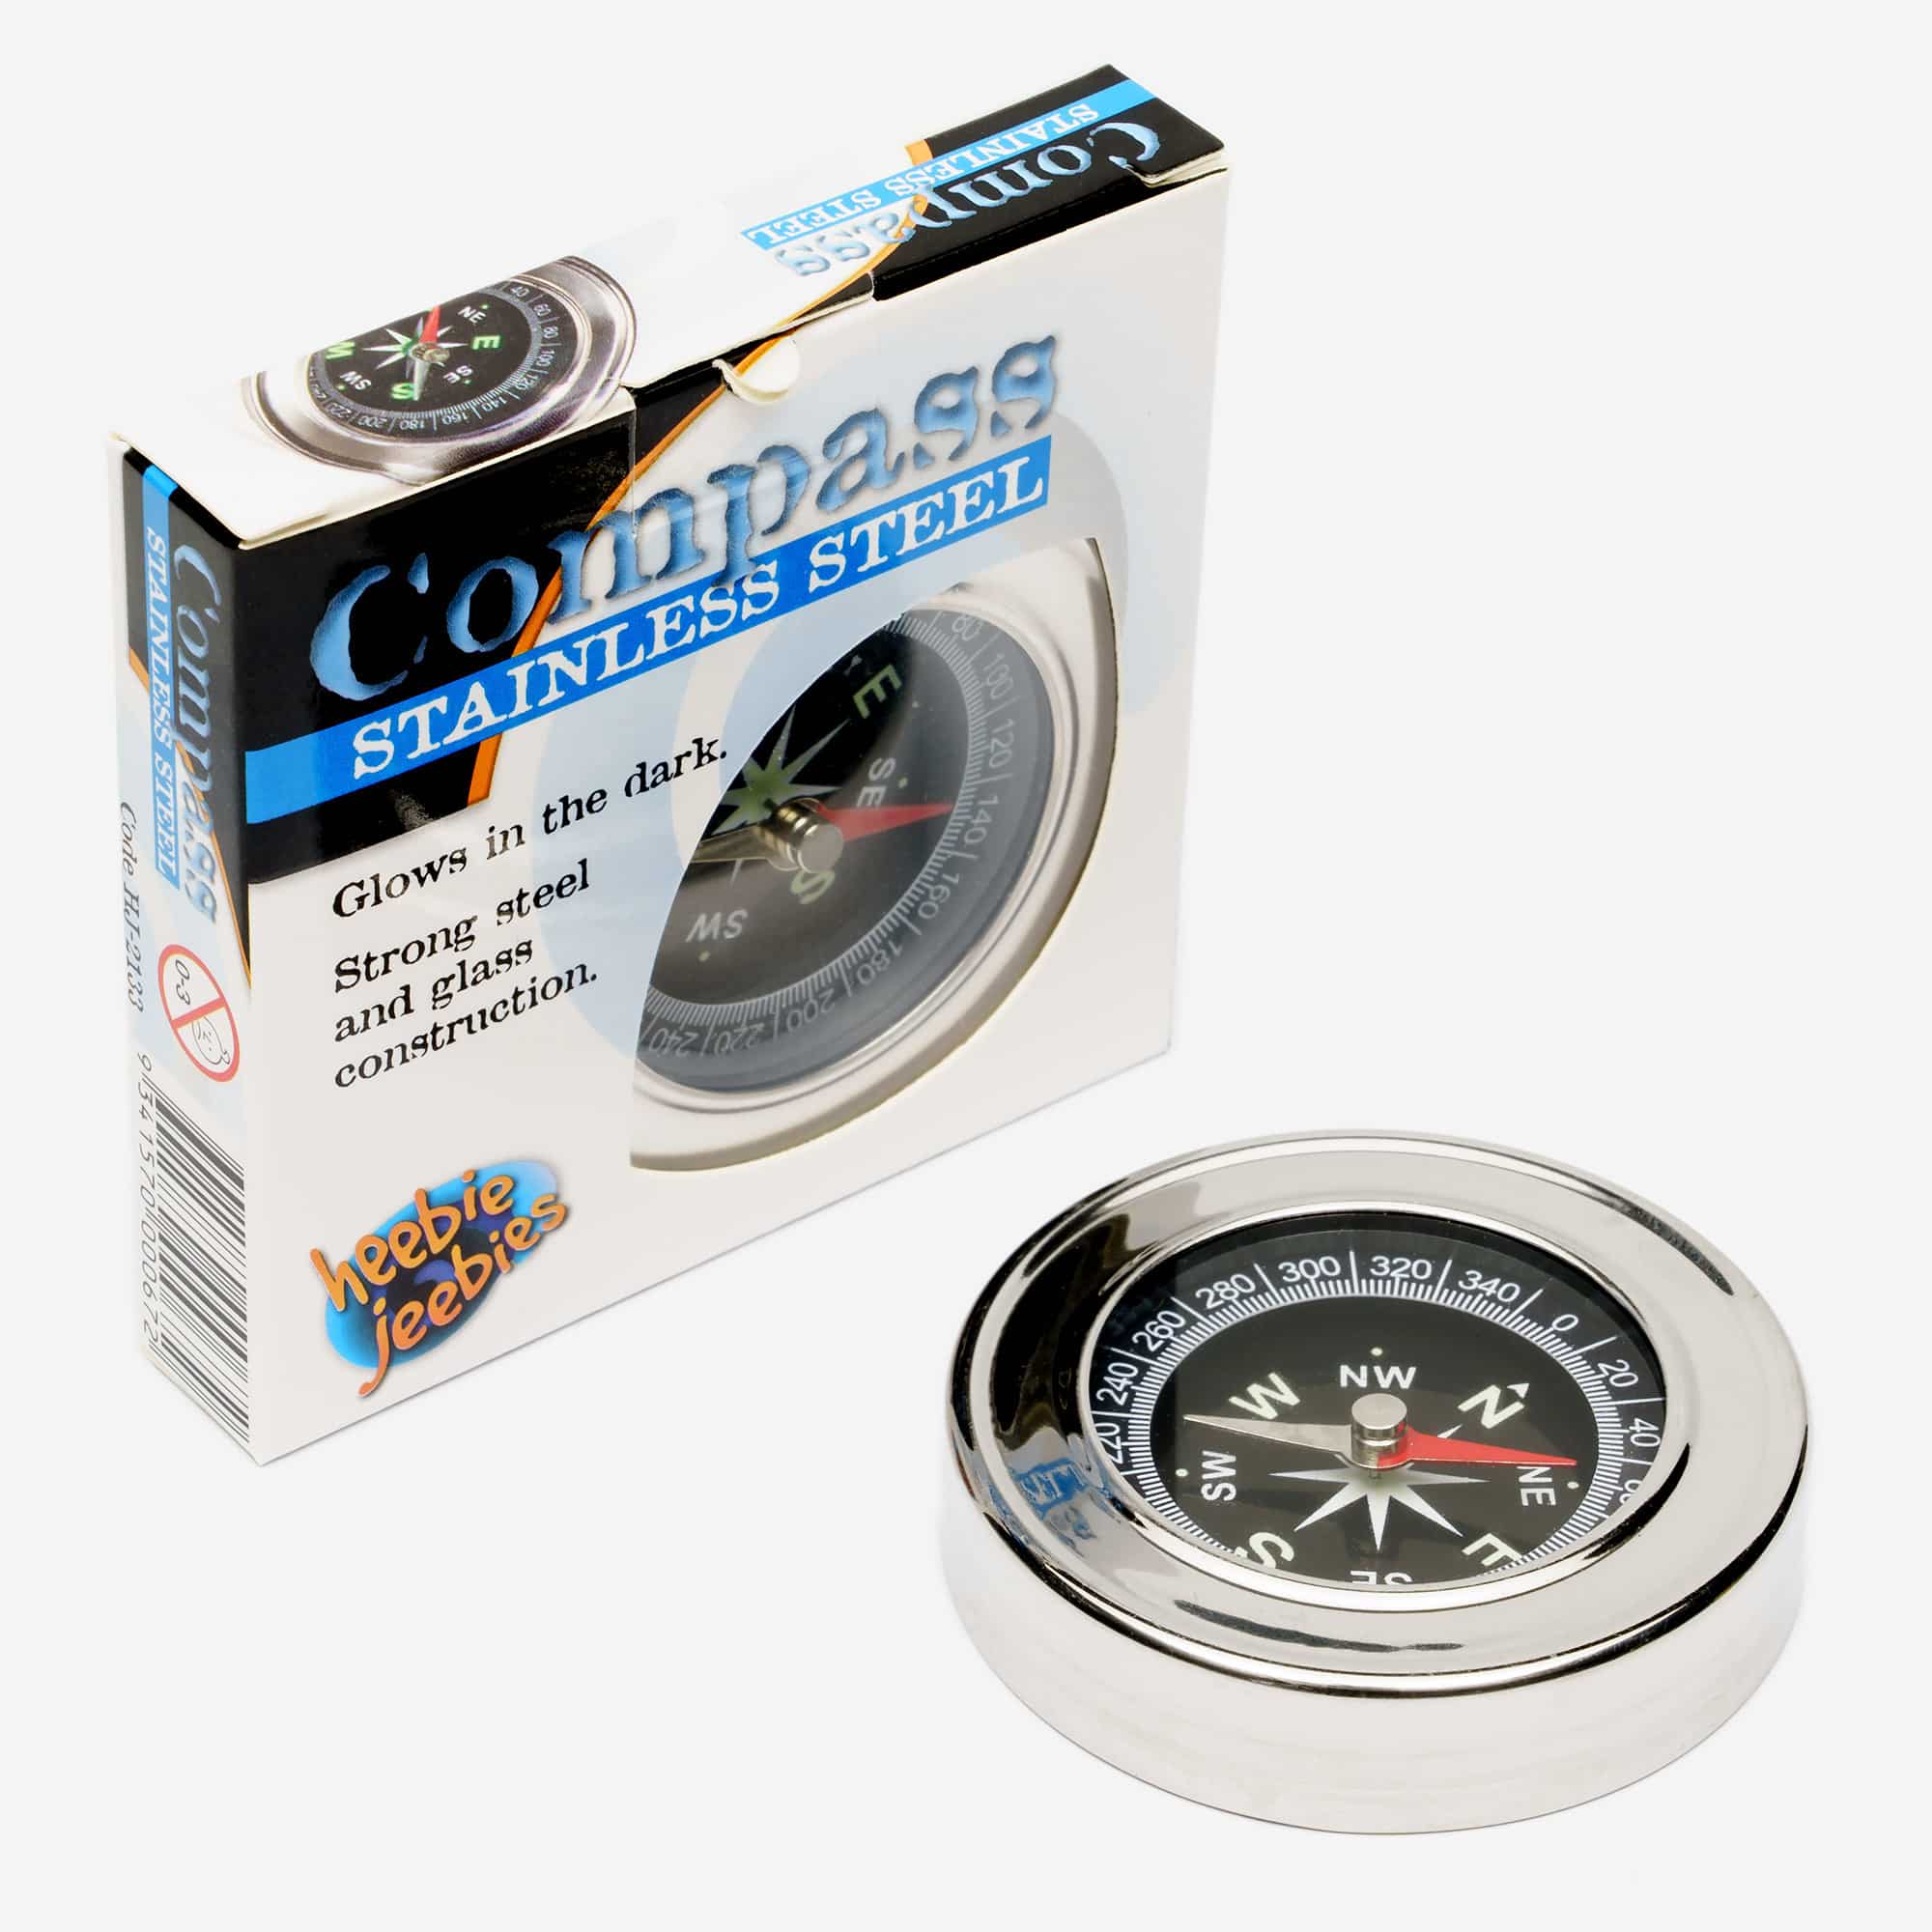 Stainless Steel Compass